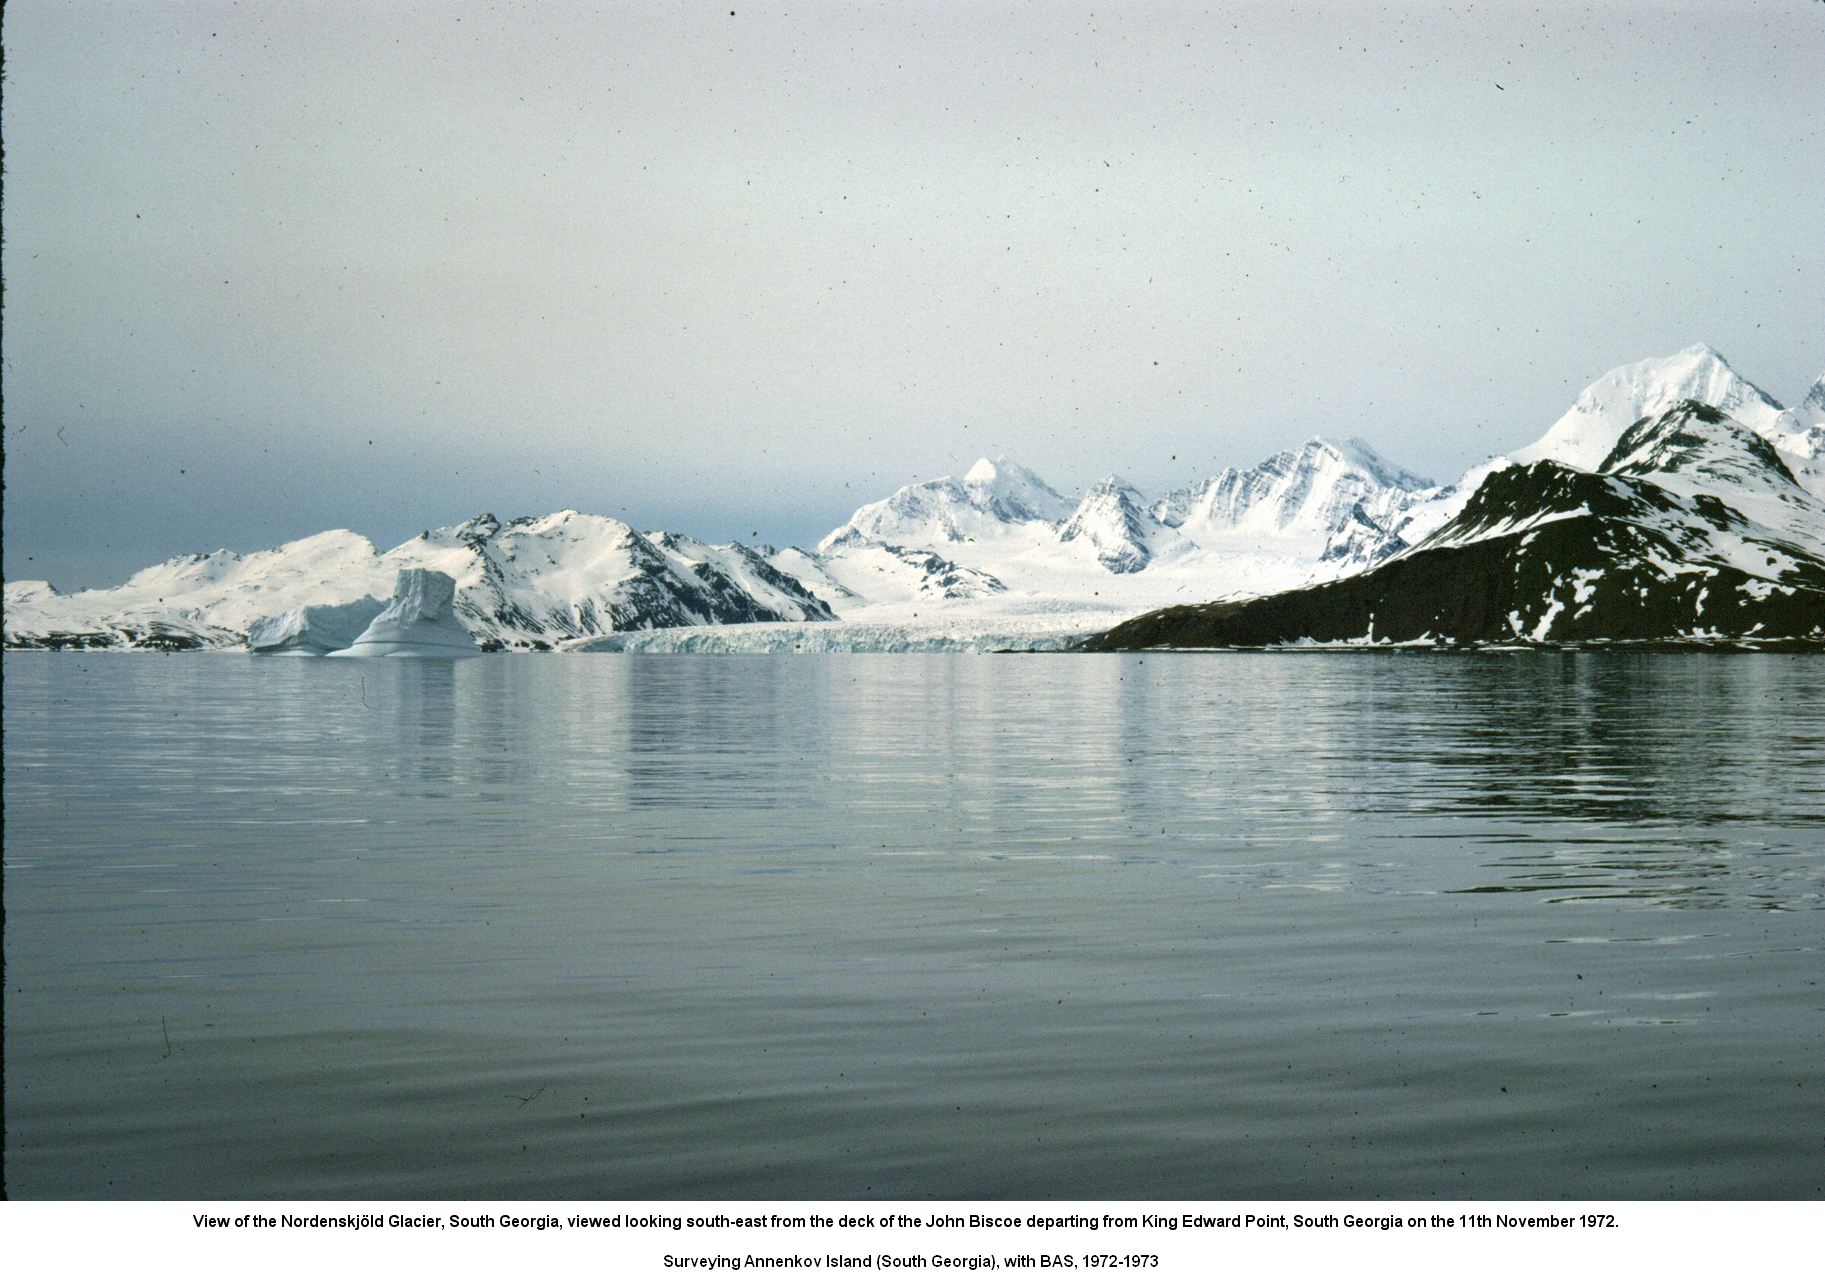 View of the Nordenskjöld Glacier, South Georgia, viewed looking south-east from the deck of the John Biscoe departing from King Edward Point, South Georgia on the 11th November 1972.